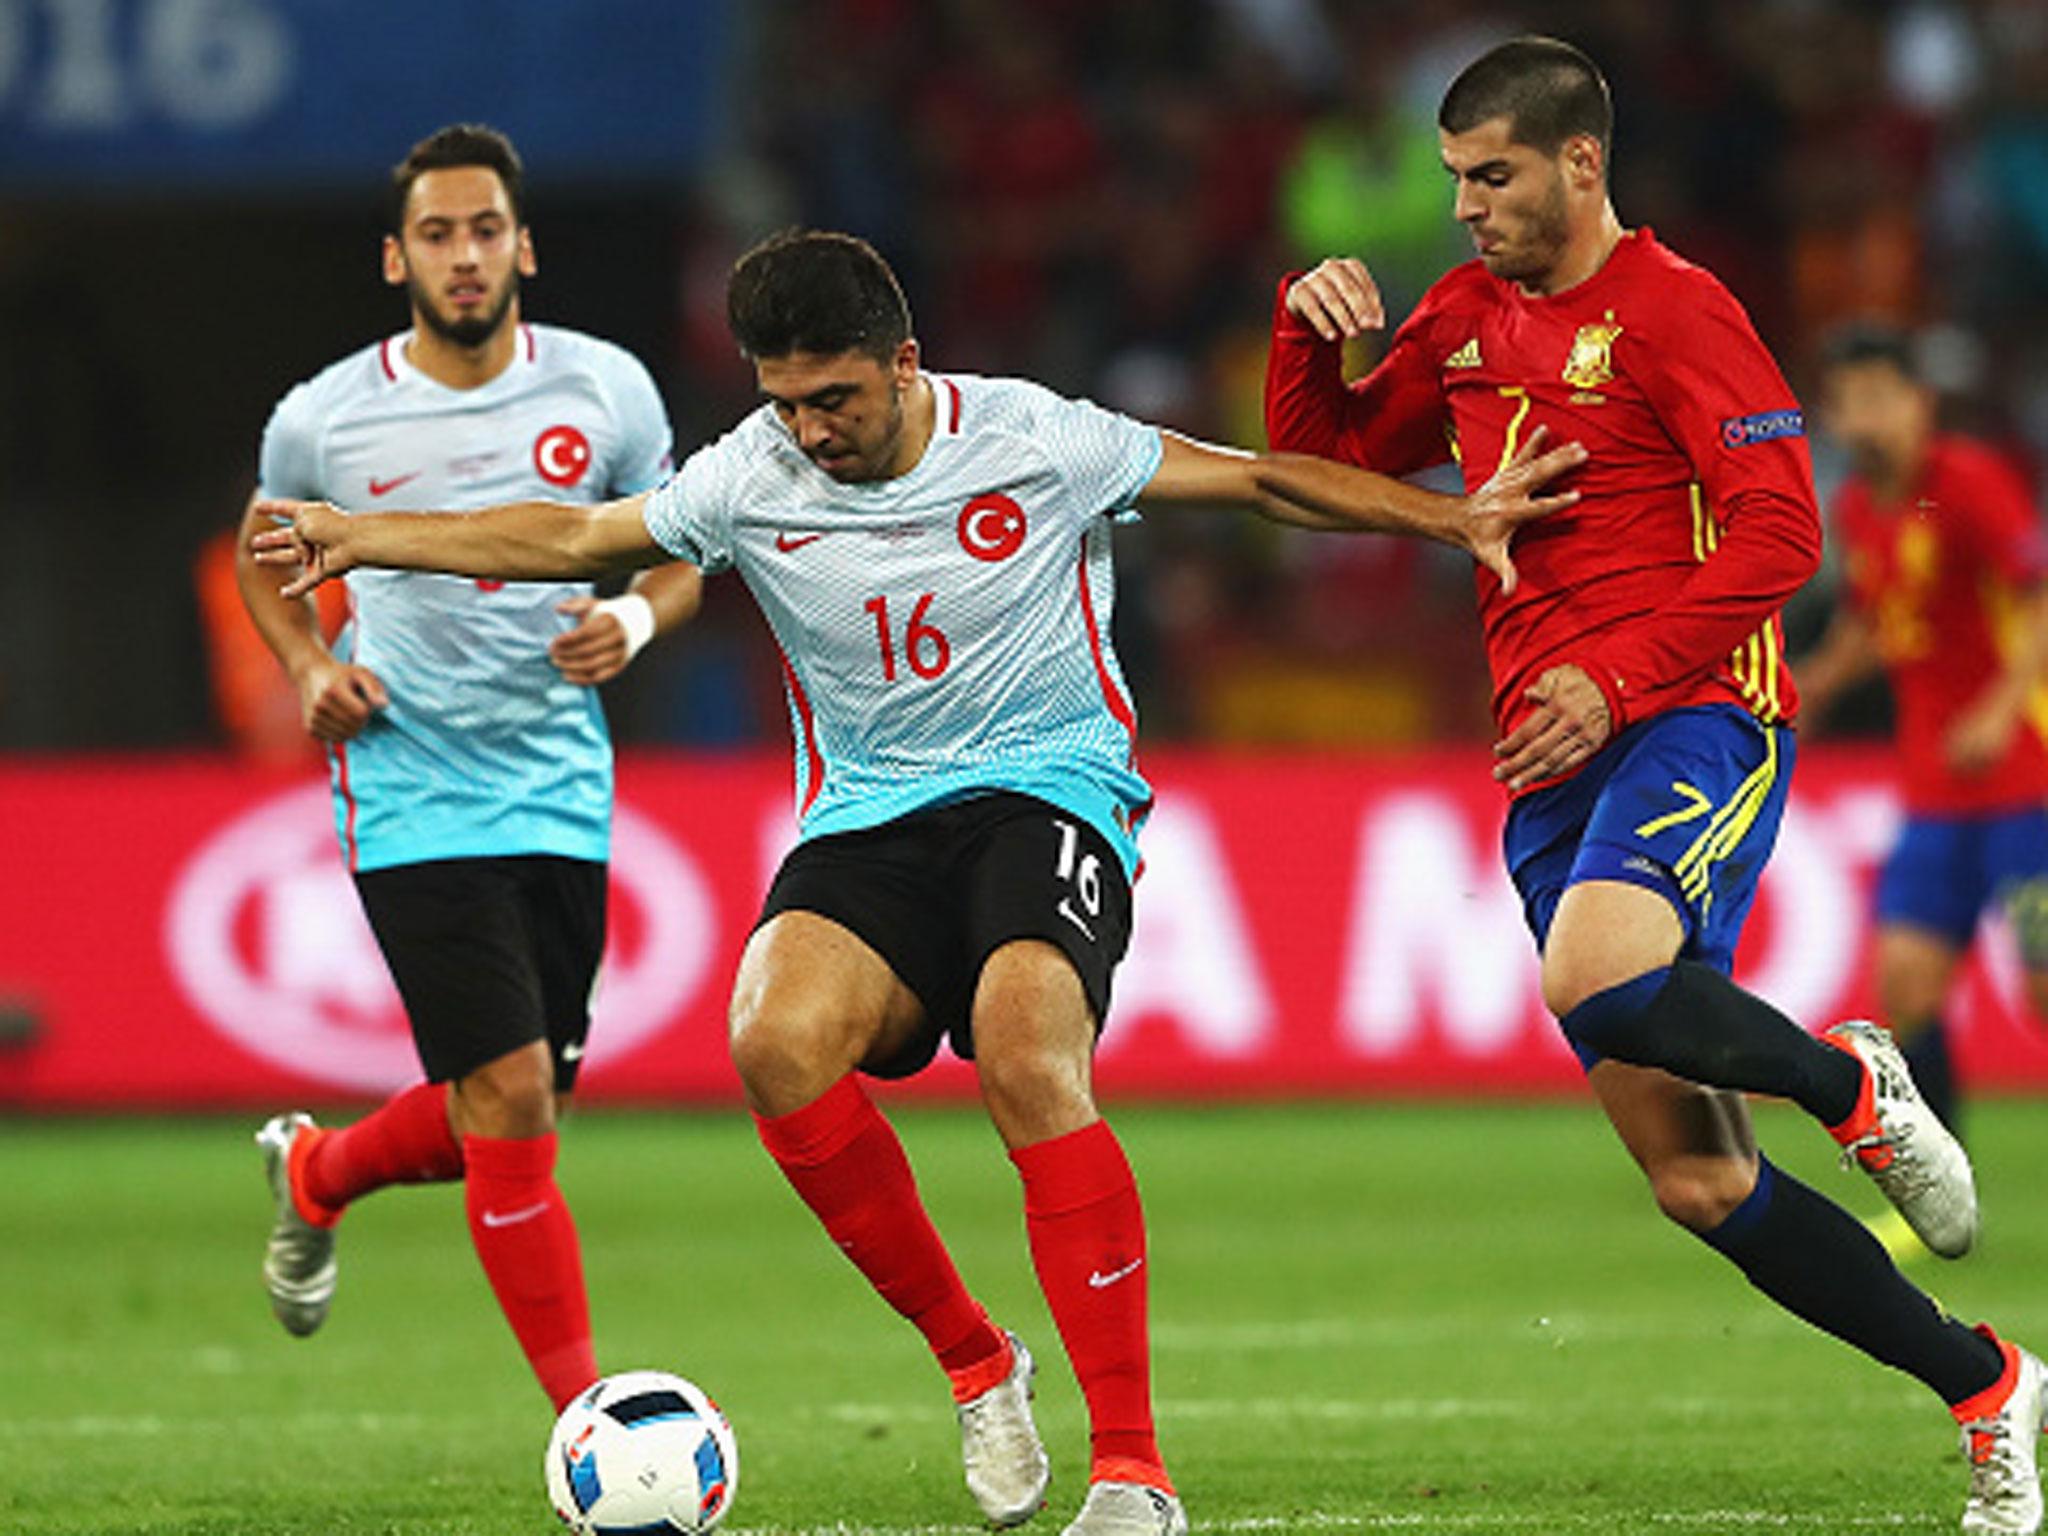 Ozan Tufan was unable to impact much against a strong Spanish side, for whom Alvaro Morata scored twice (Getty)